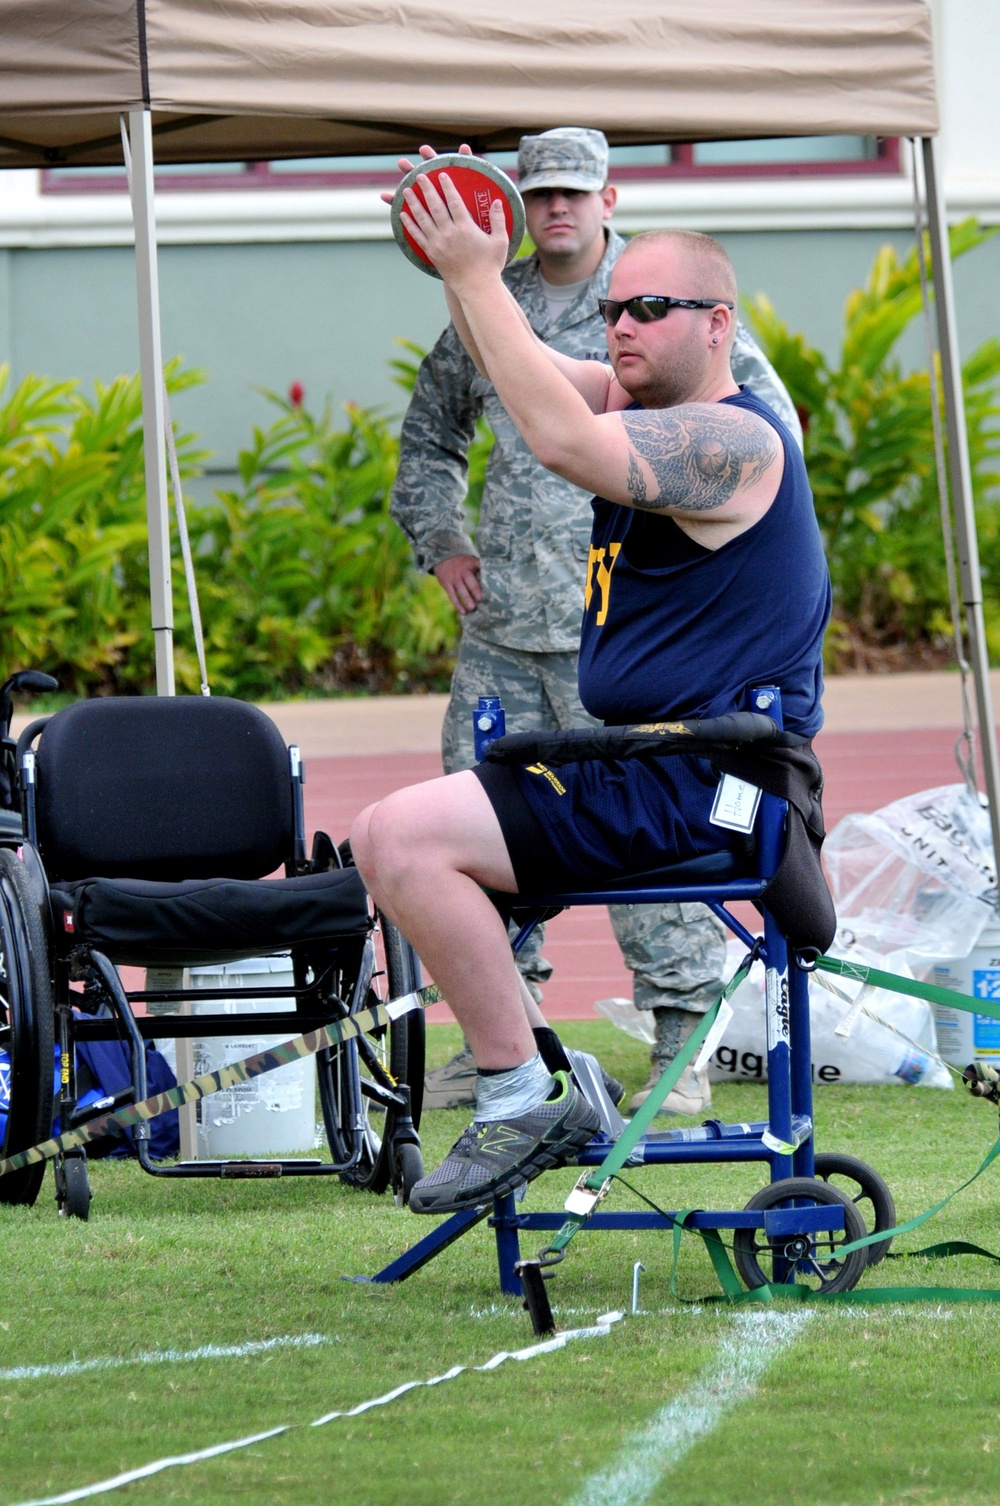 Wounded Warrior Pacific Invitational track and field meet